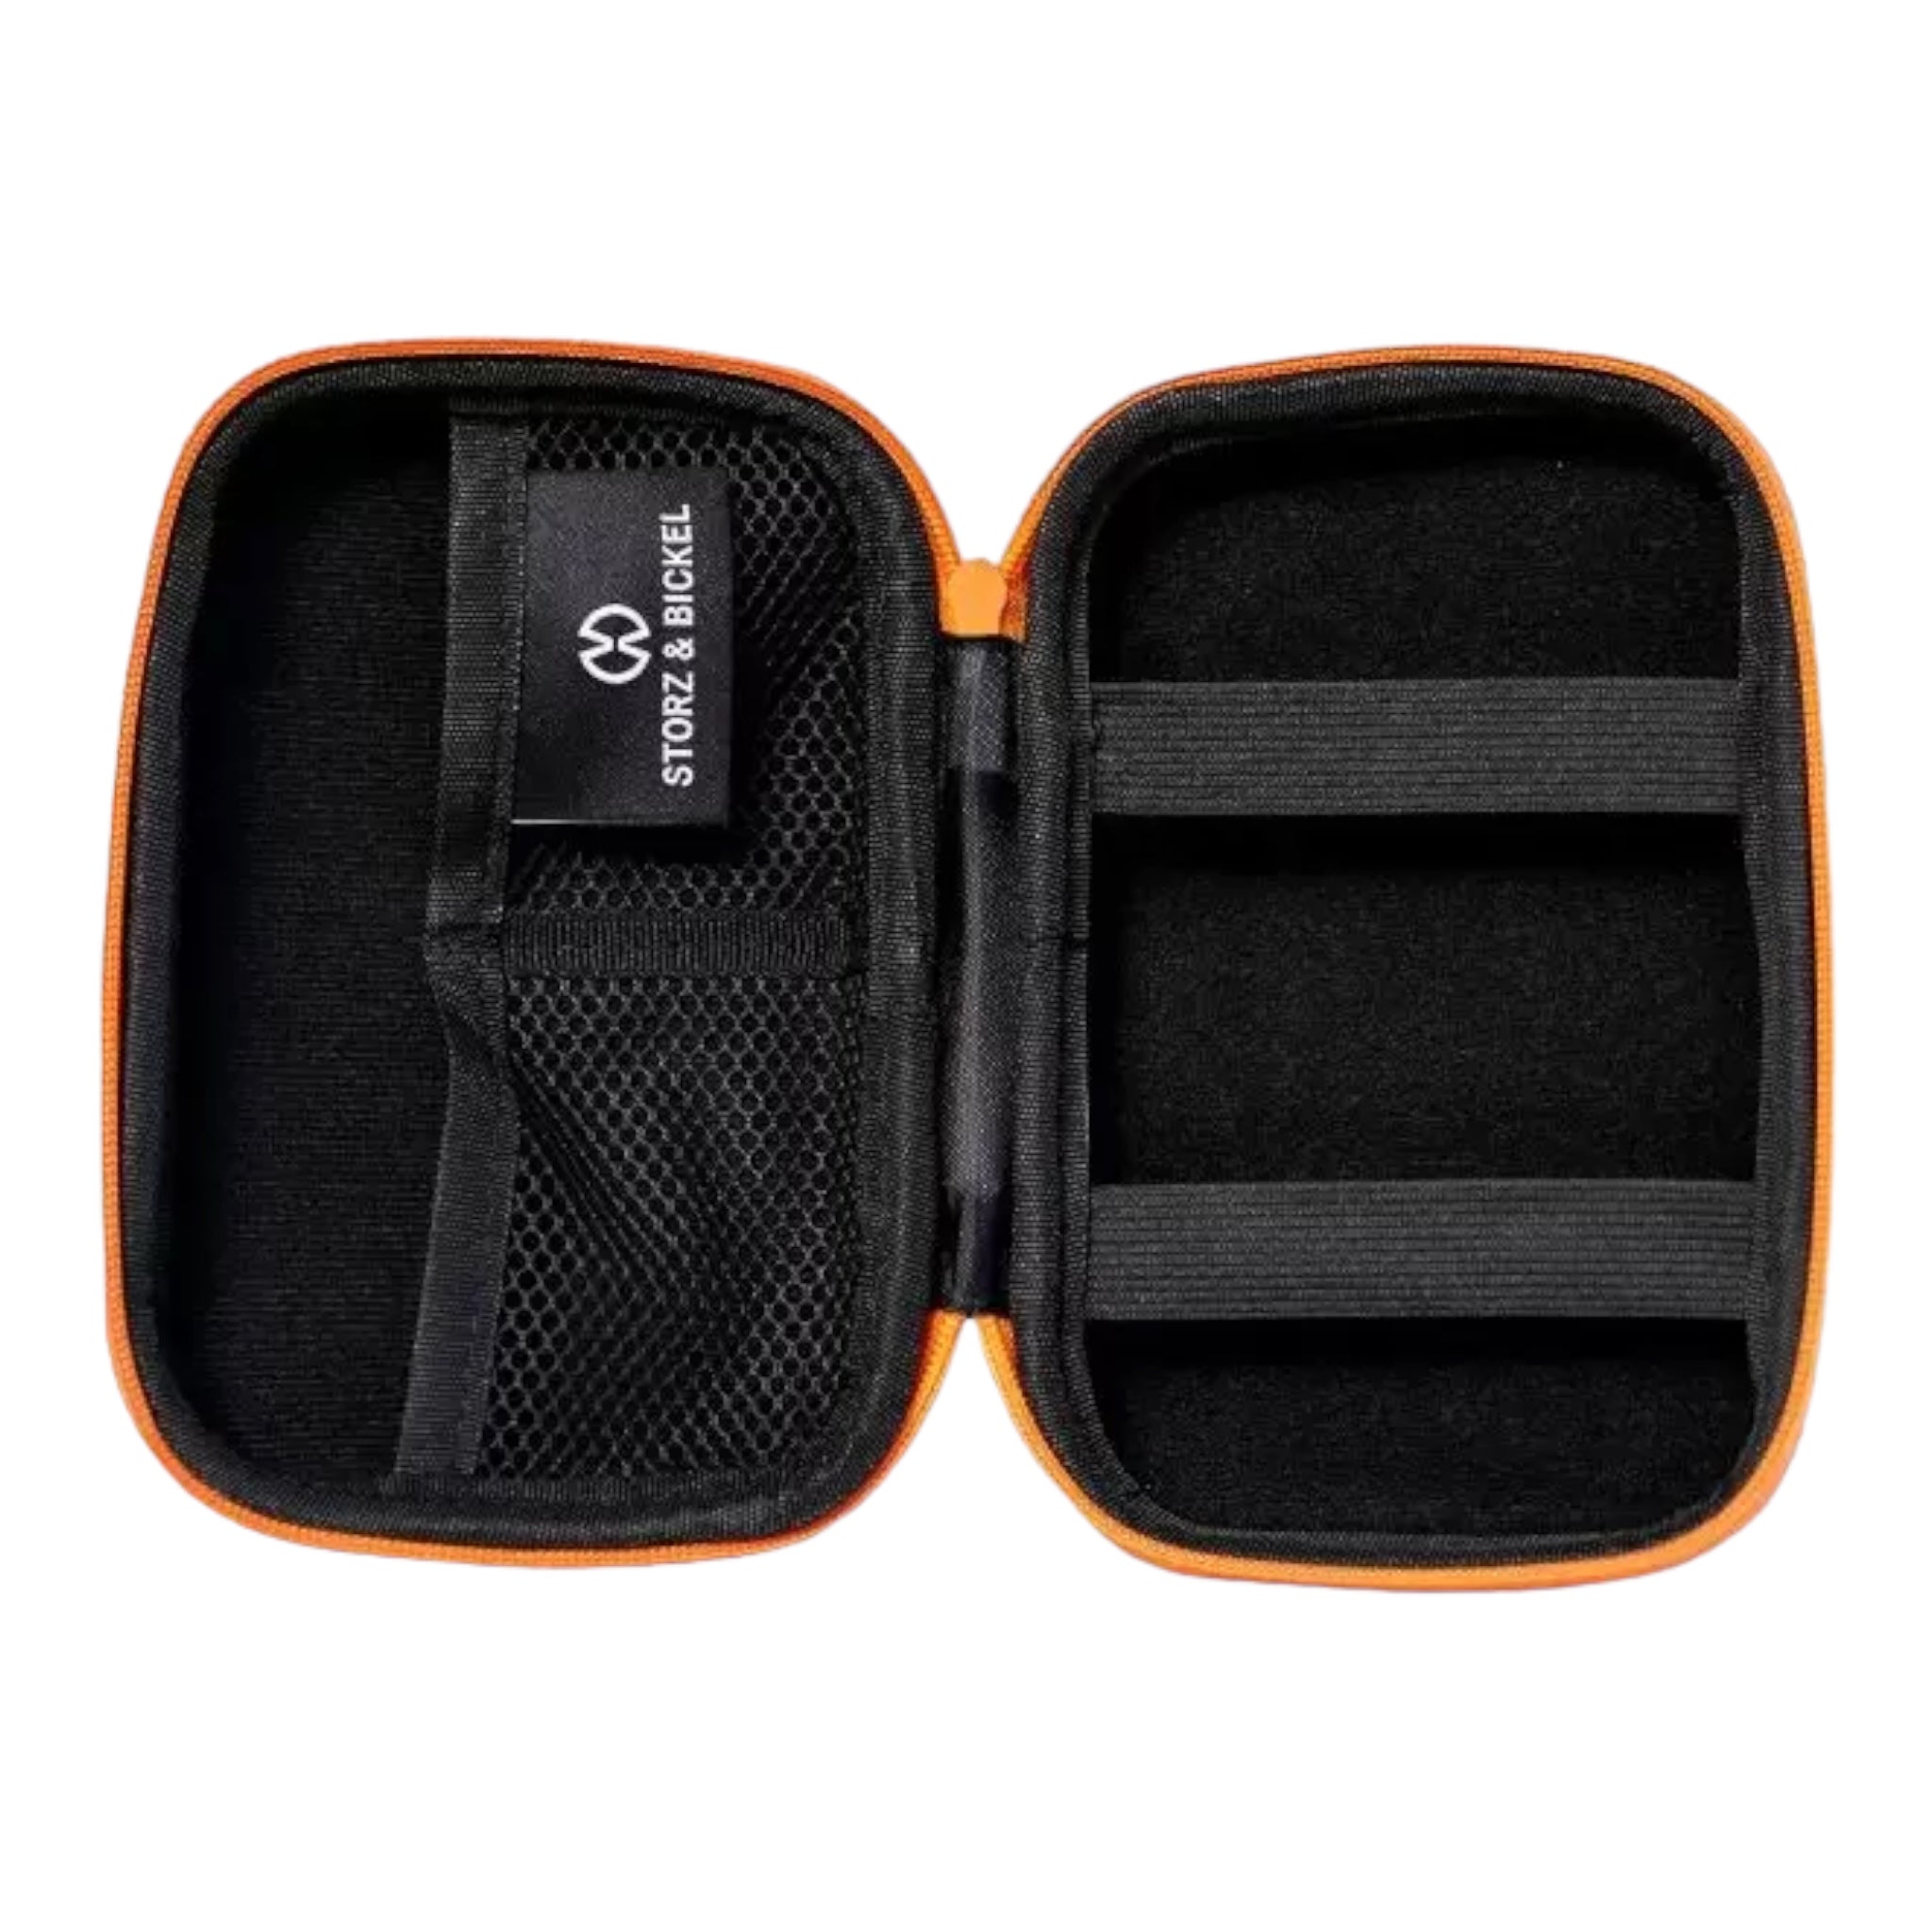 the new Storz And Bickel - Mighty+ Carrying Case best 